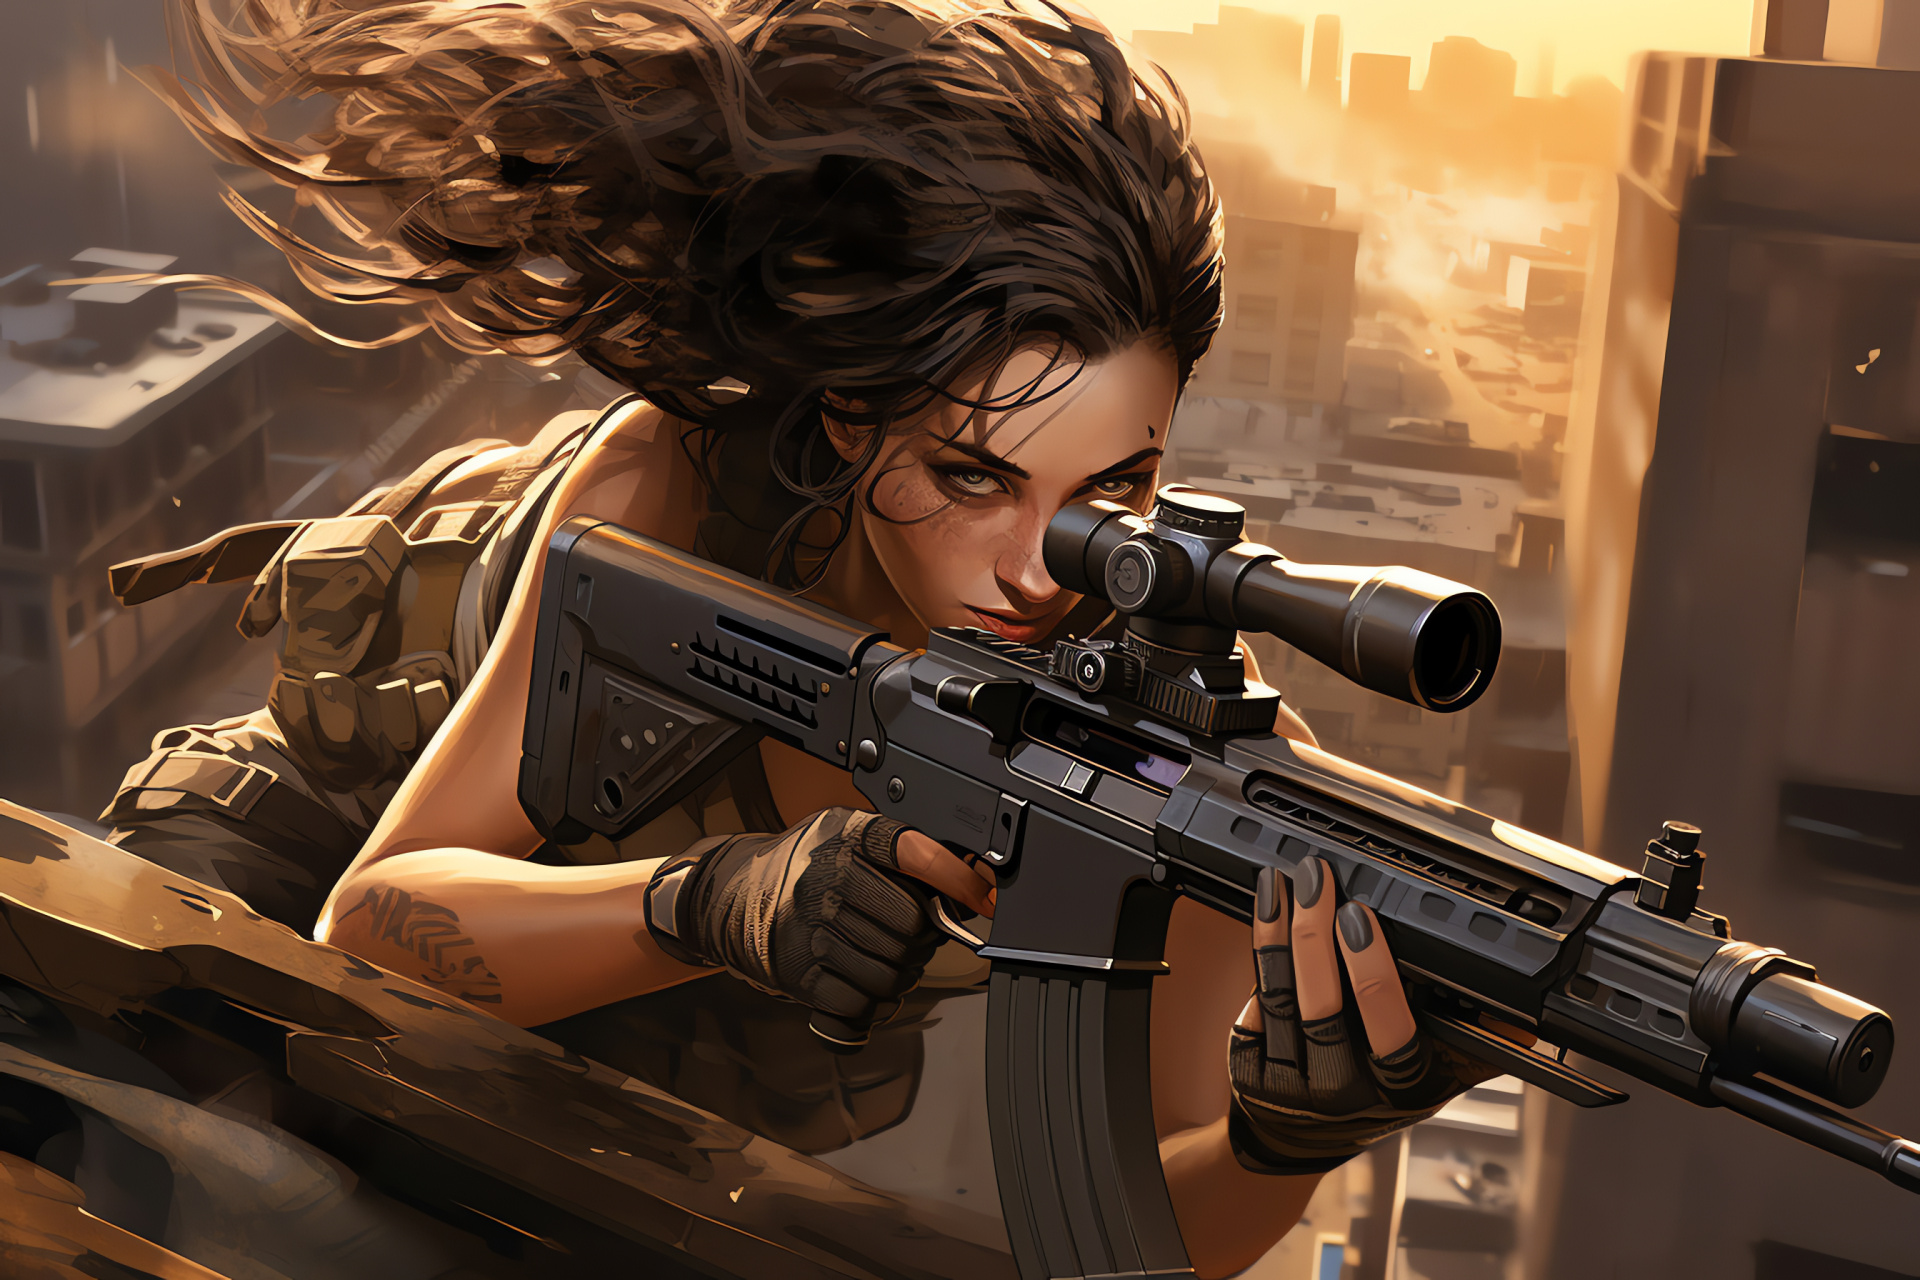 Point Blank 2018, Competitive gaming, Shooter title, Female sharpshooter, Precision firearm, HD Desktop Wallpaper